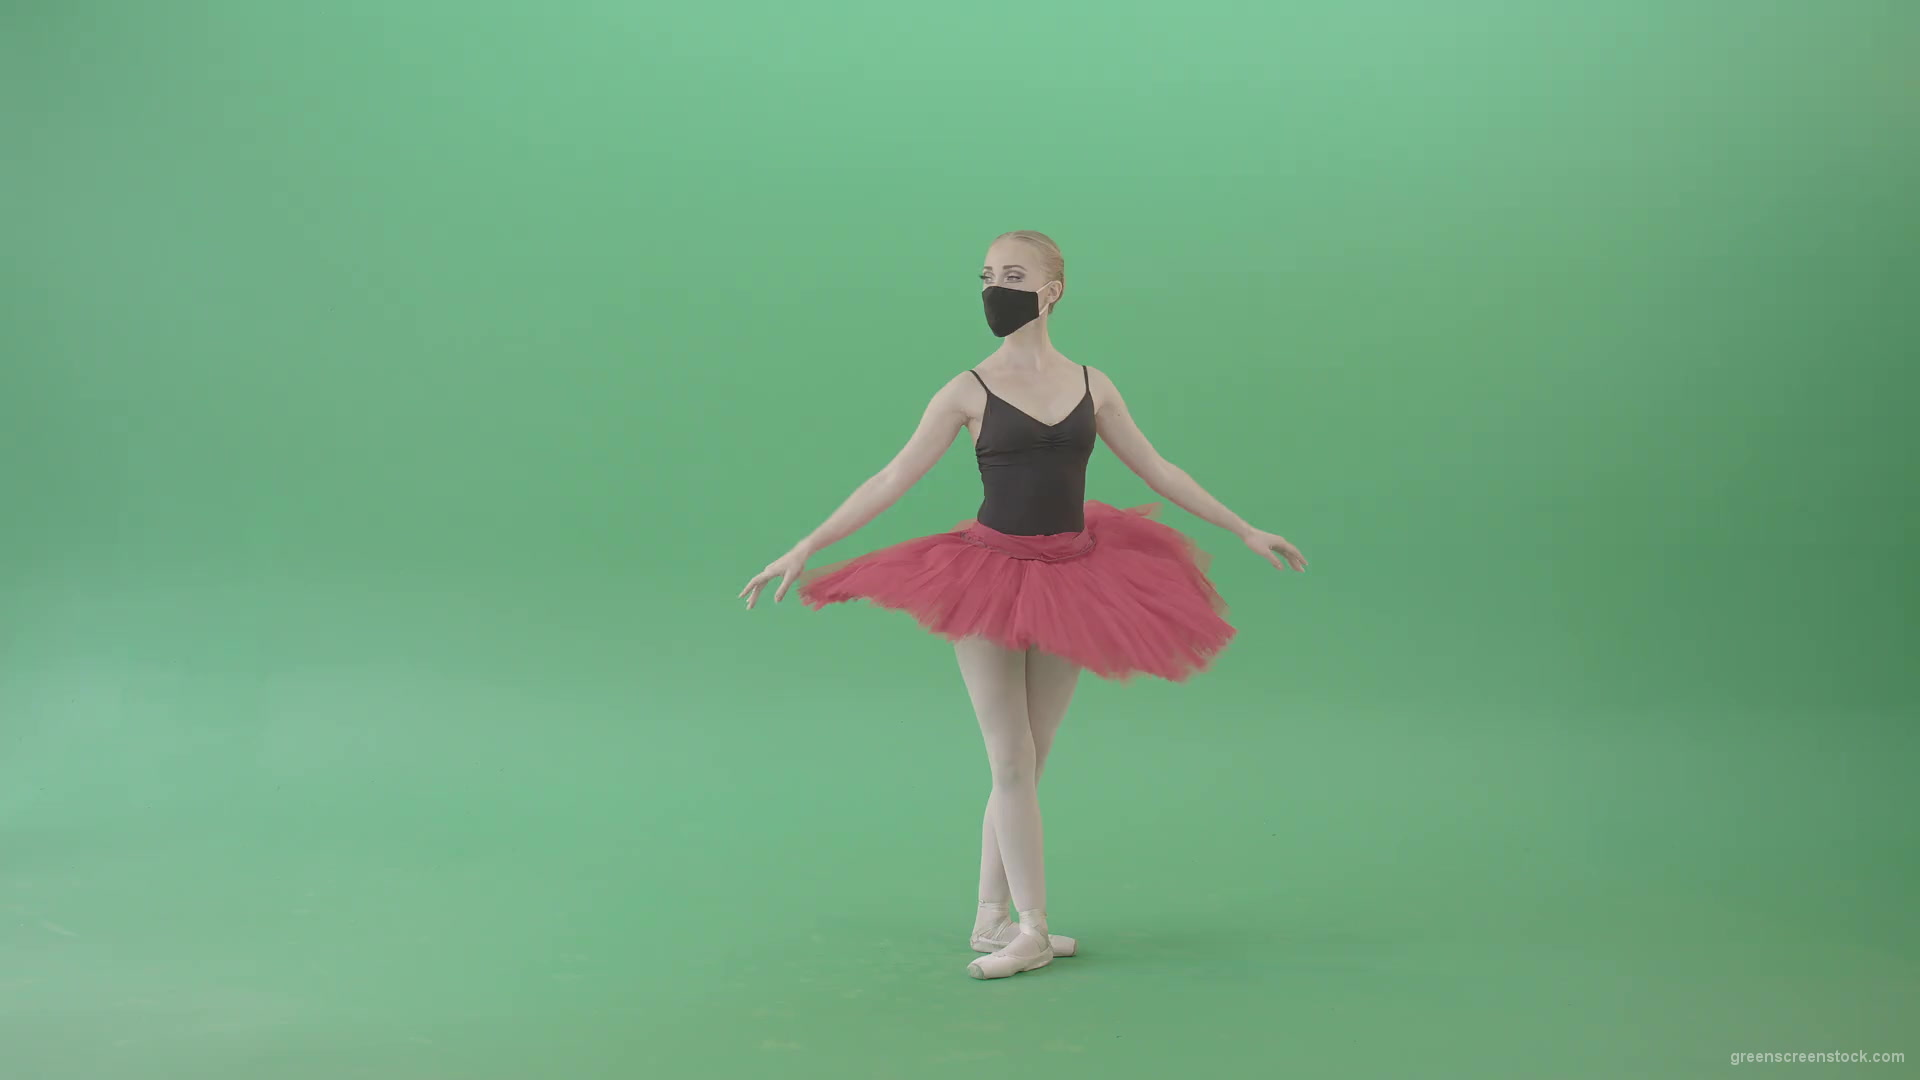 Blonde-Ballet-Girl-dancing-and-jumping-in-red-black-mask-isolated-on-green-screen-4K-Video-Footage--1920_001 Green Screen Stock